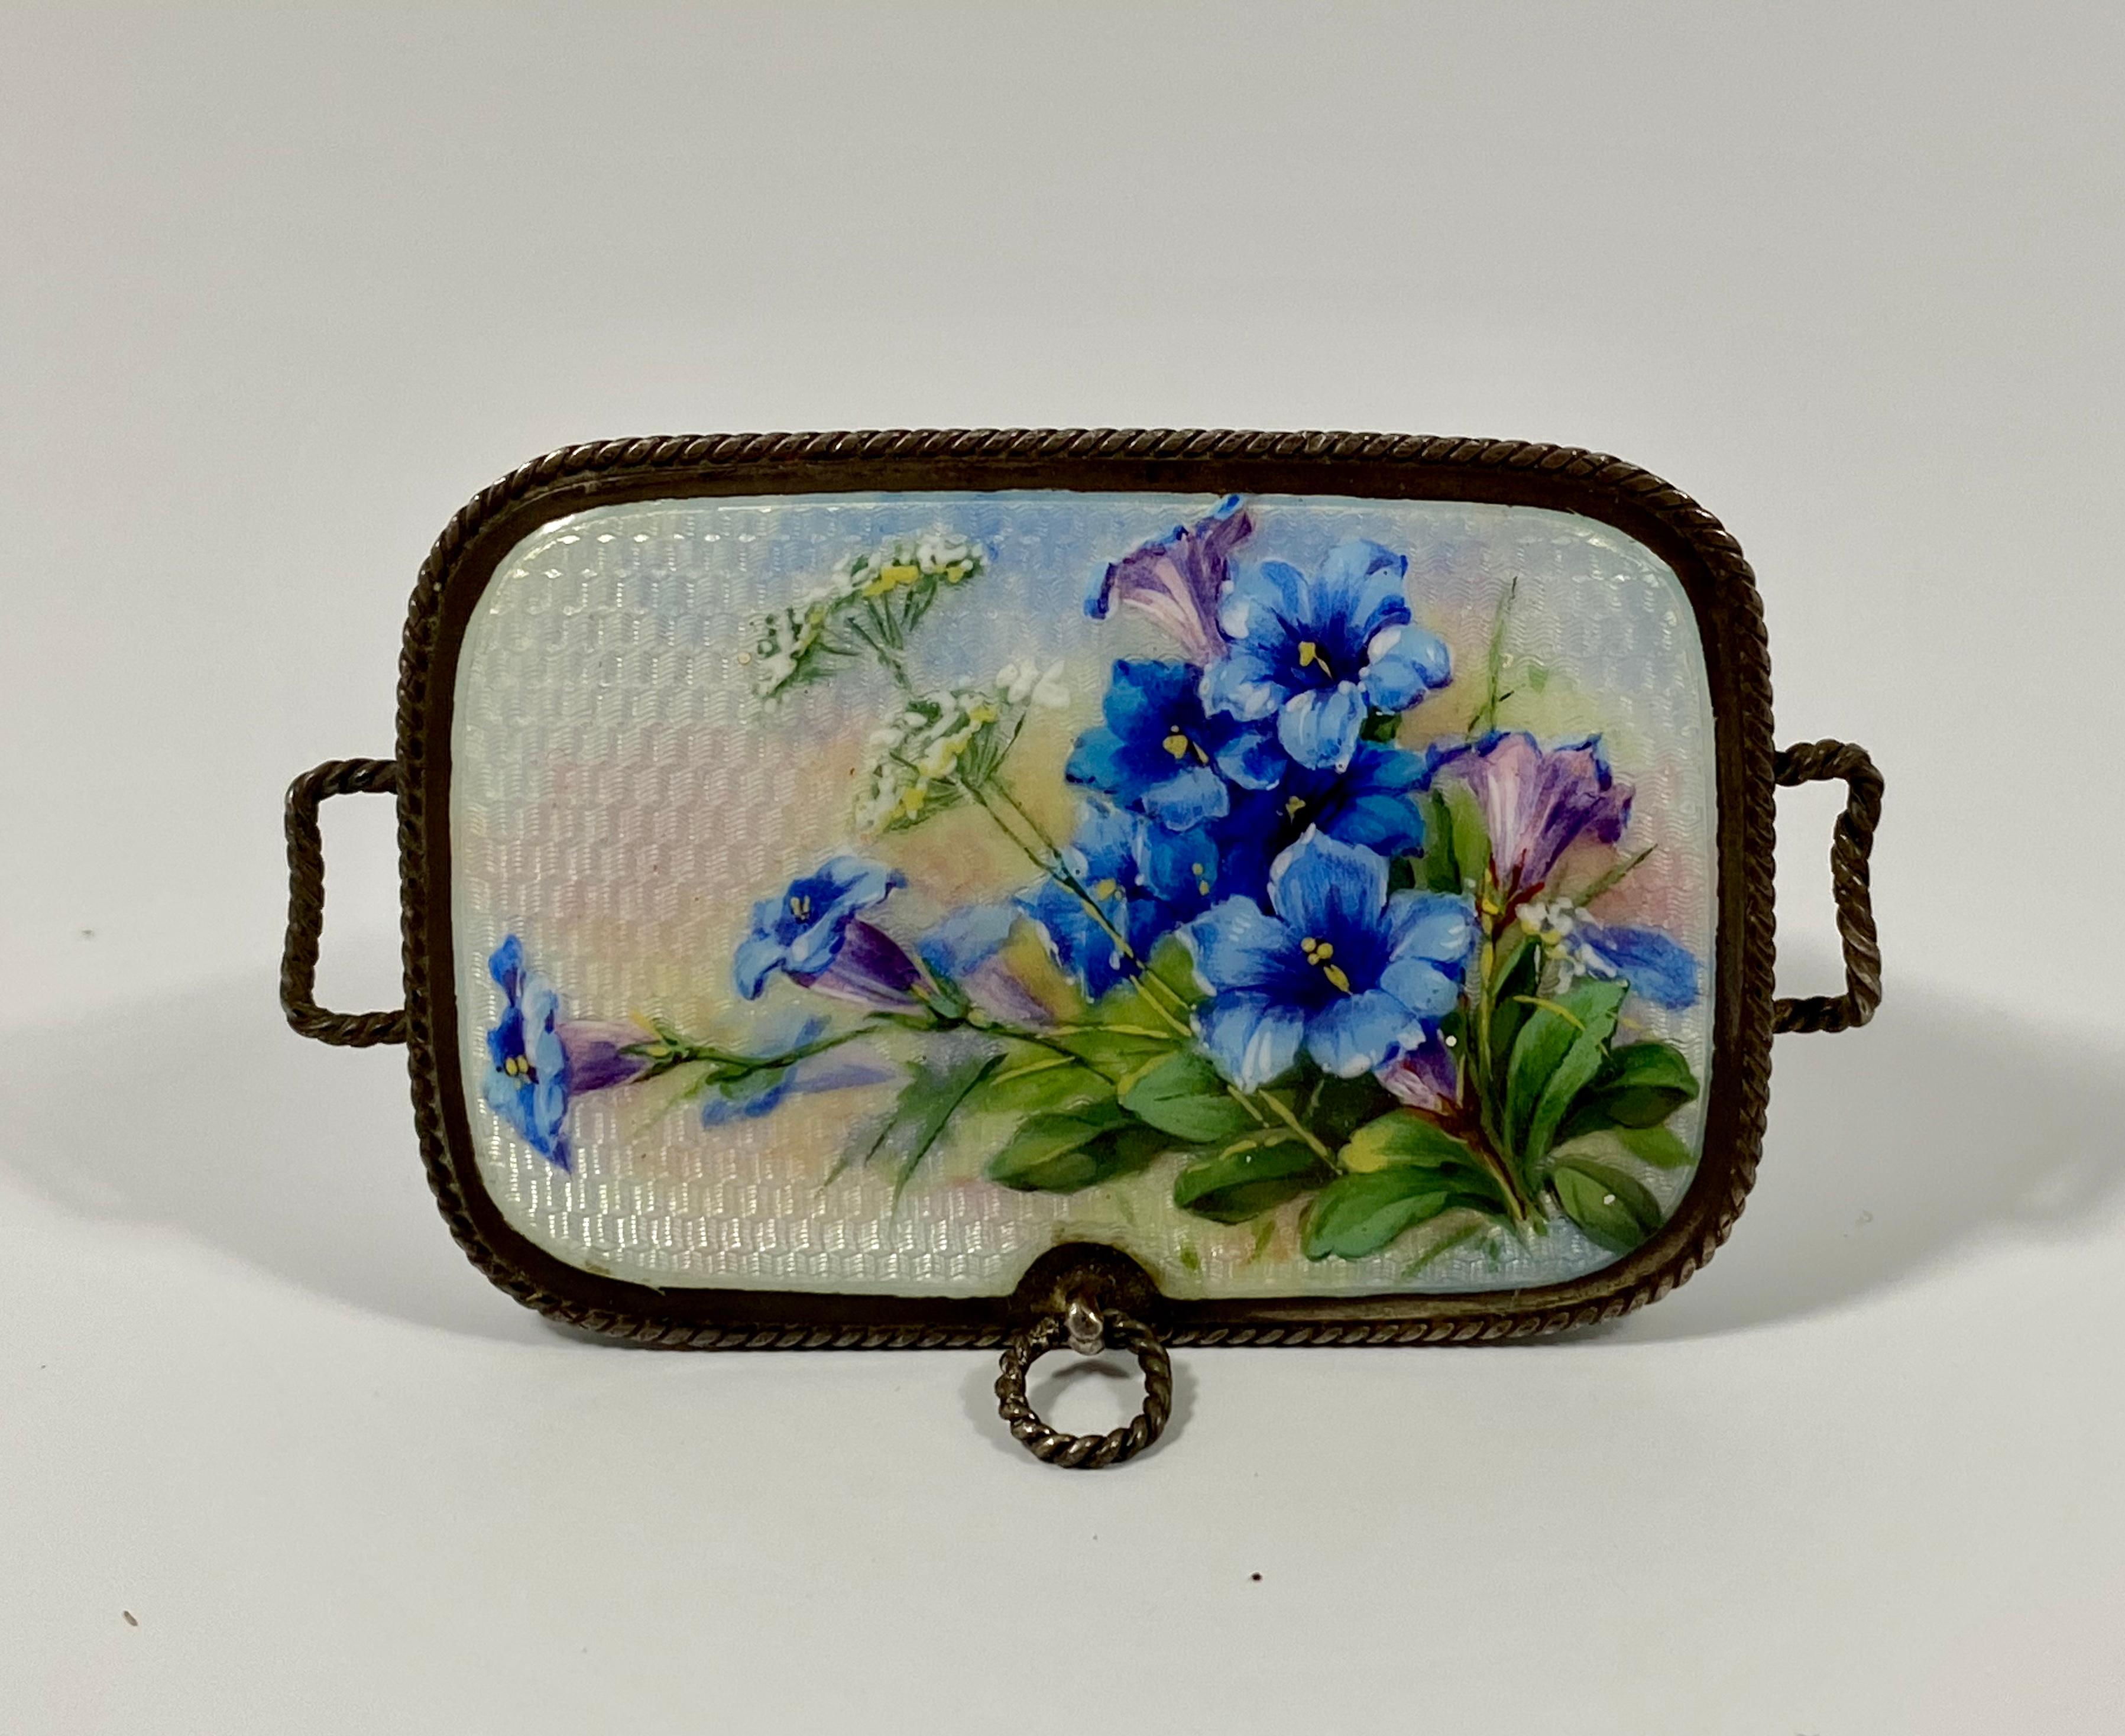 Enameled Silver and Enamel Box, Dated 1911, Import Marks for Cohen & Charles